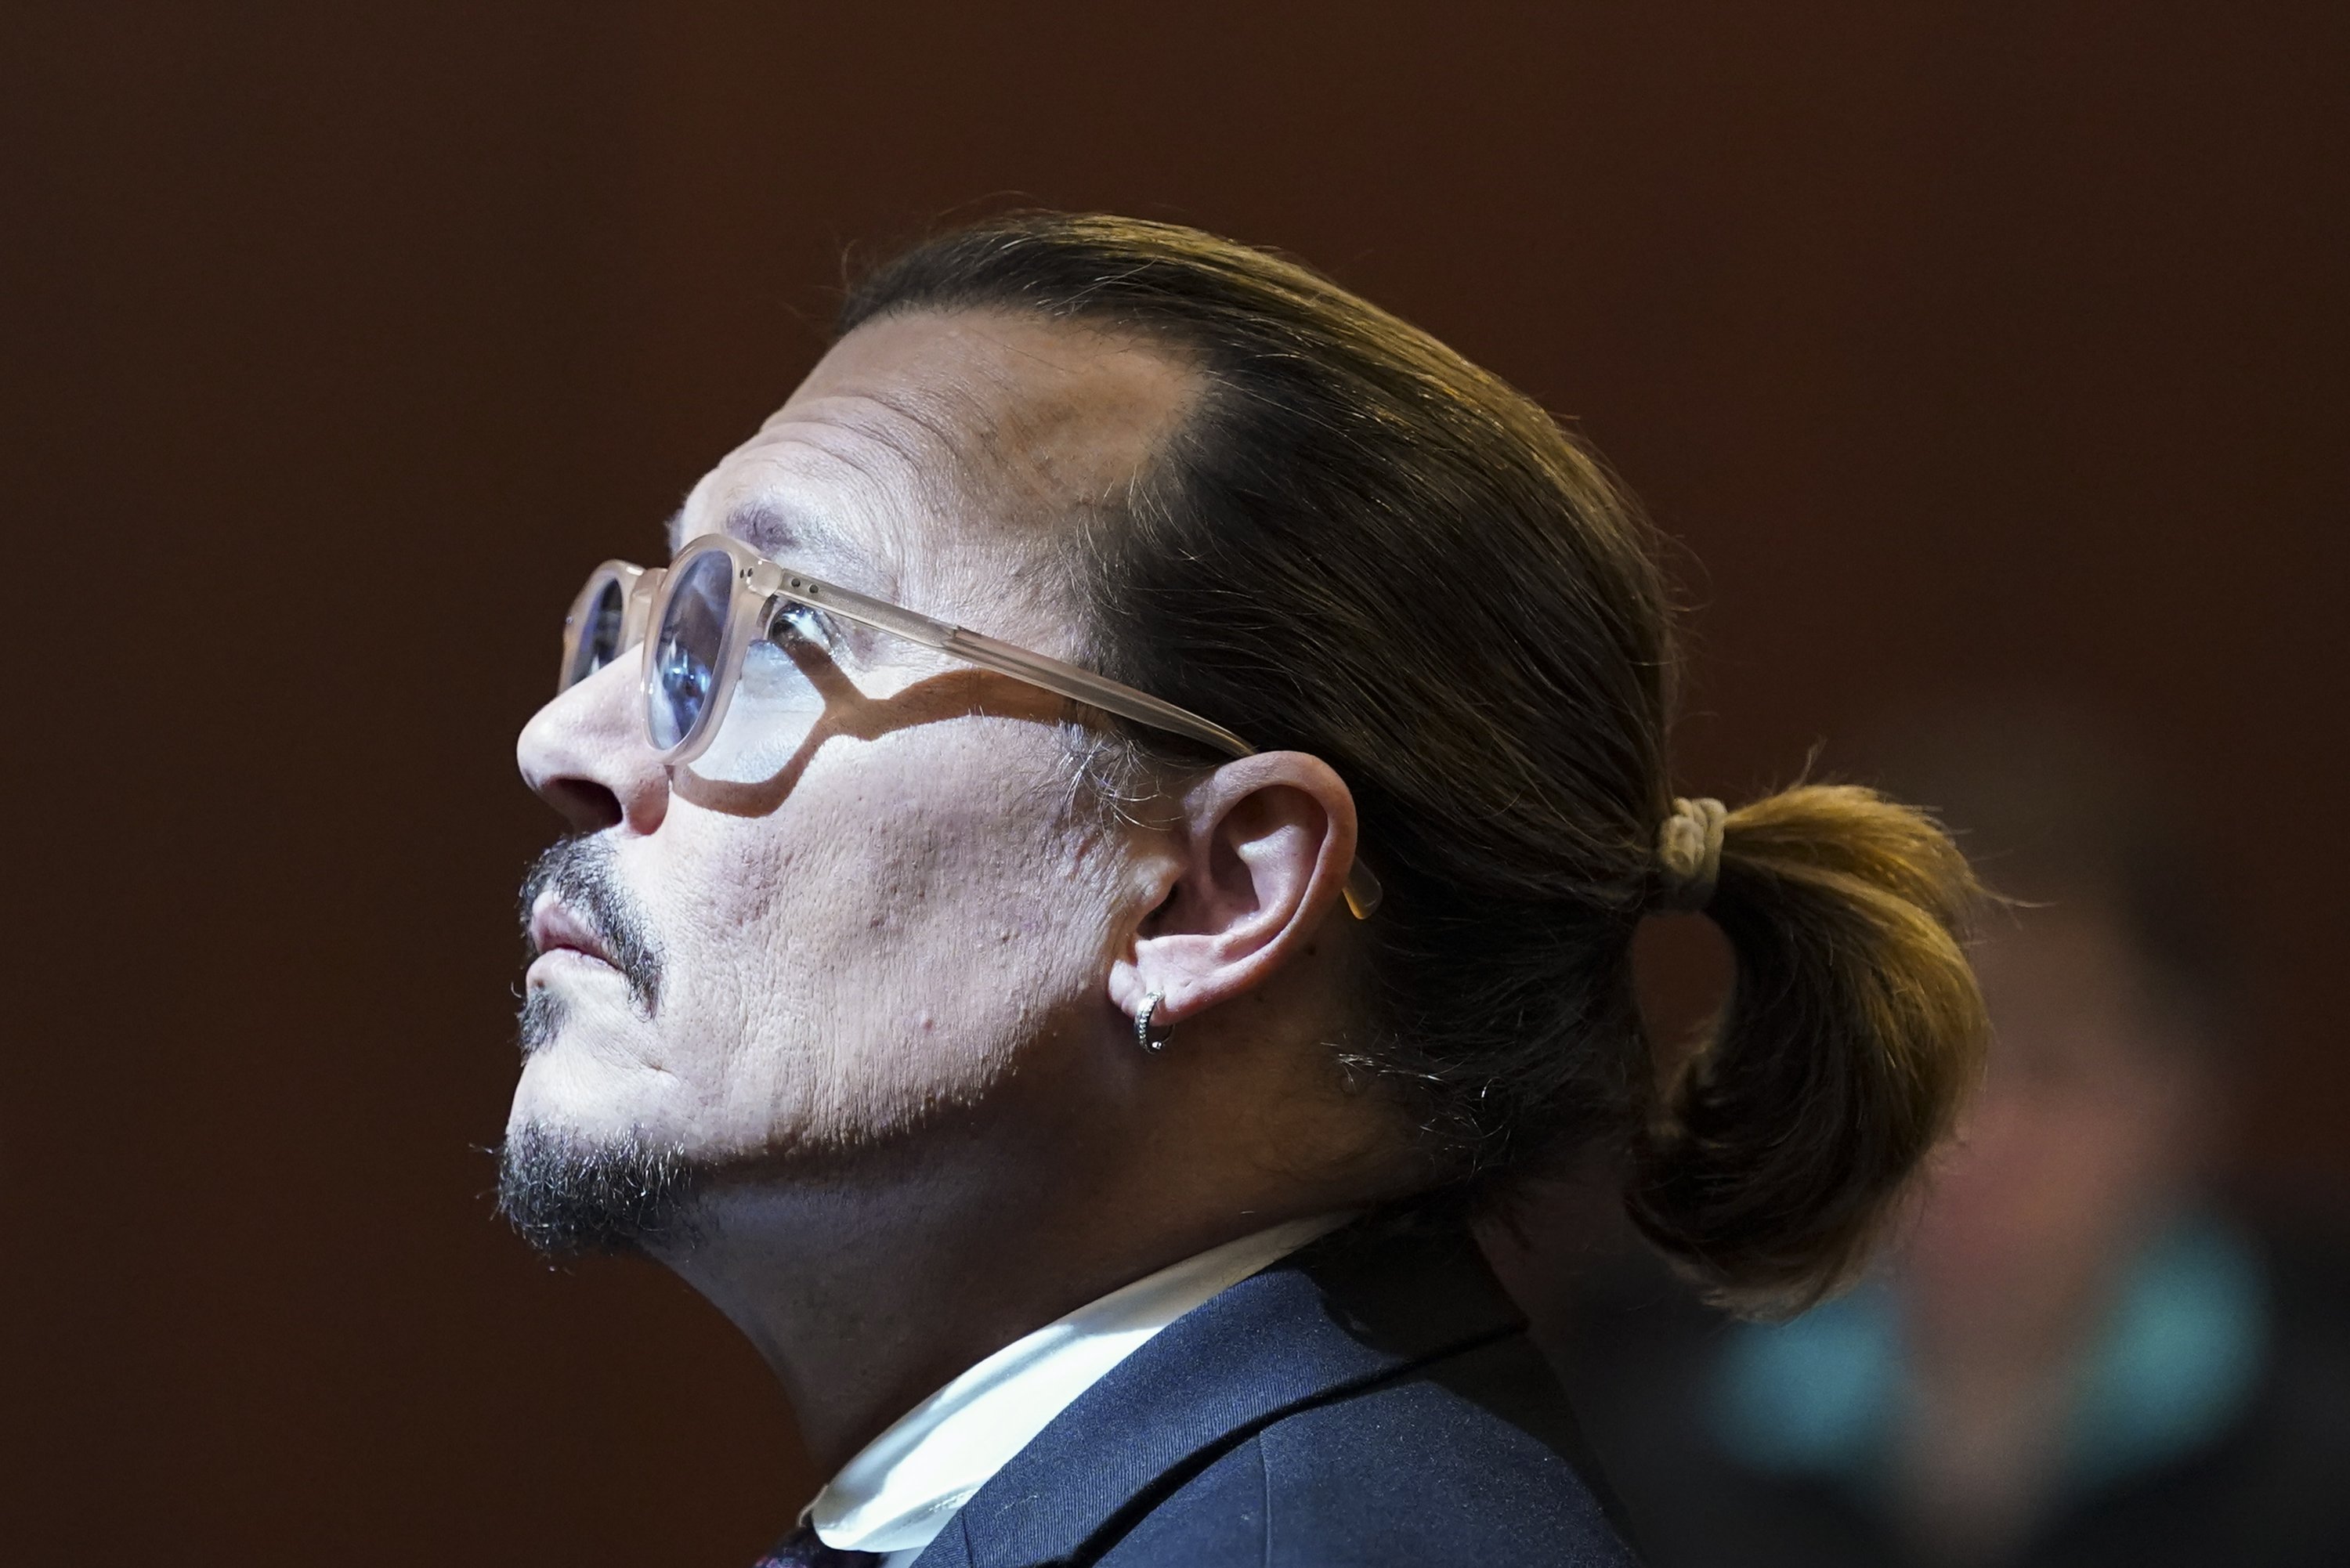 Johnny Depp's star faded way before Heard trial: Former agent | Daily Sabah